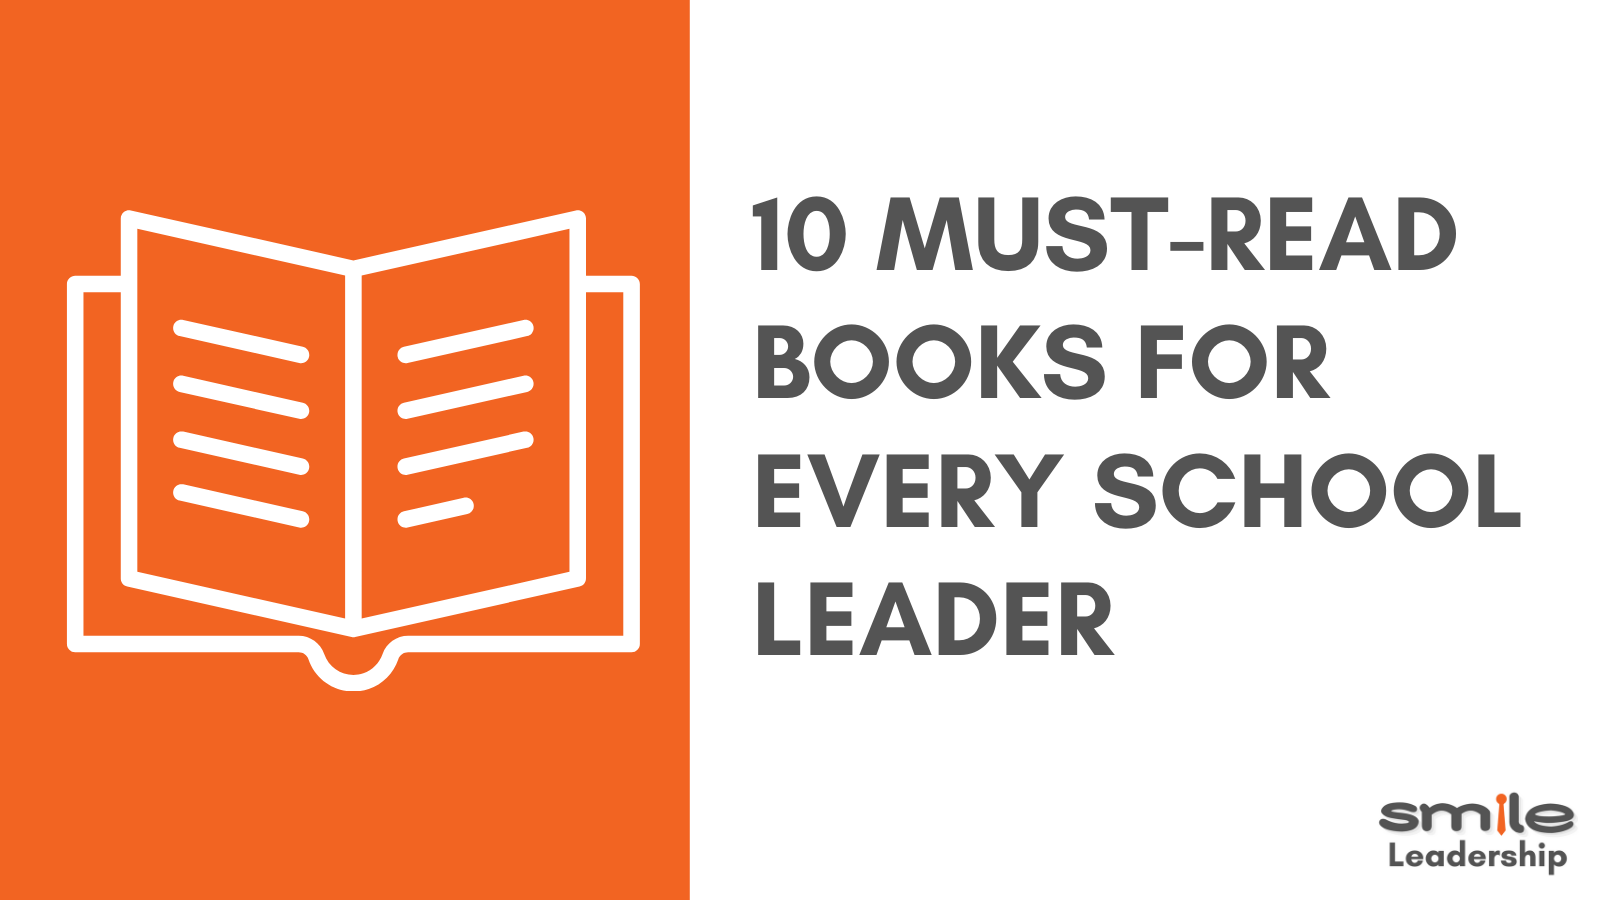 The 10 must-read books for every school leader